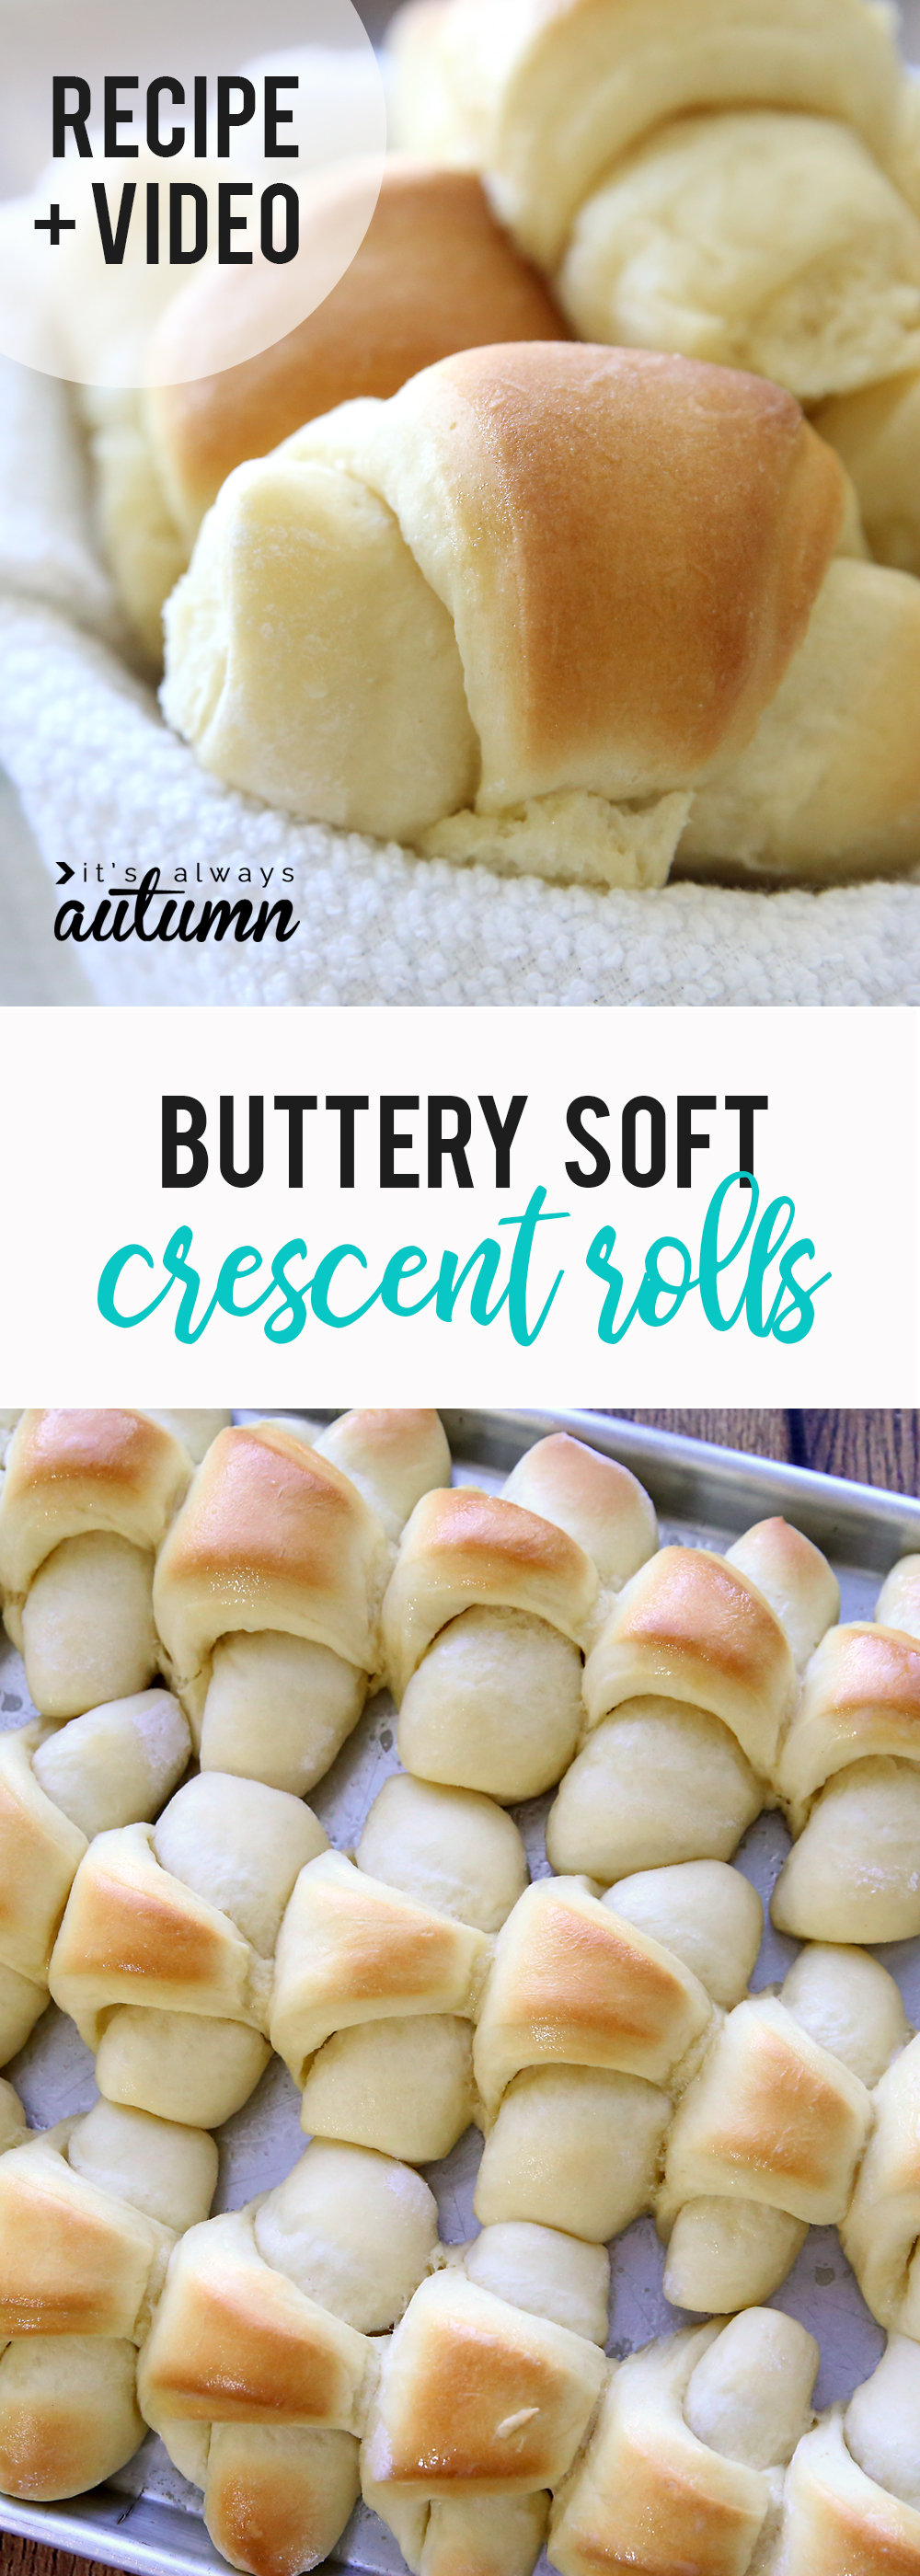 A close up of food: buttery soft crescent rolls